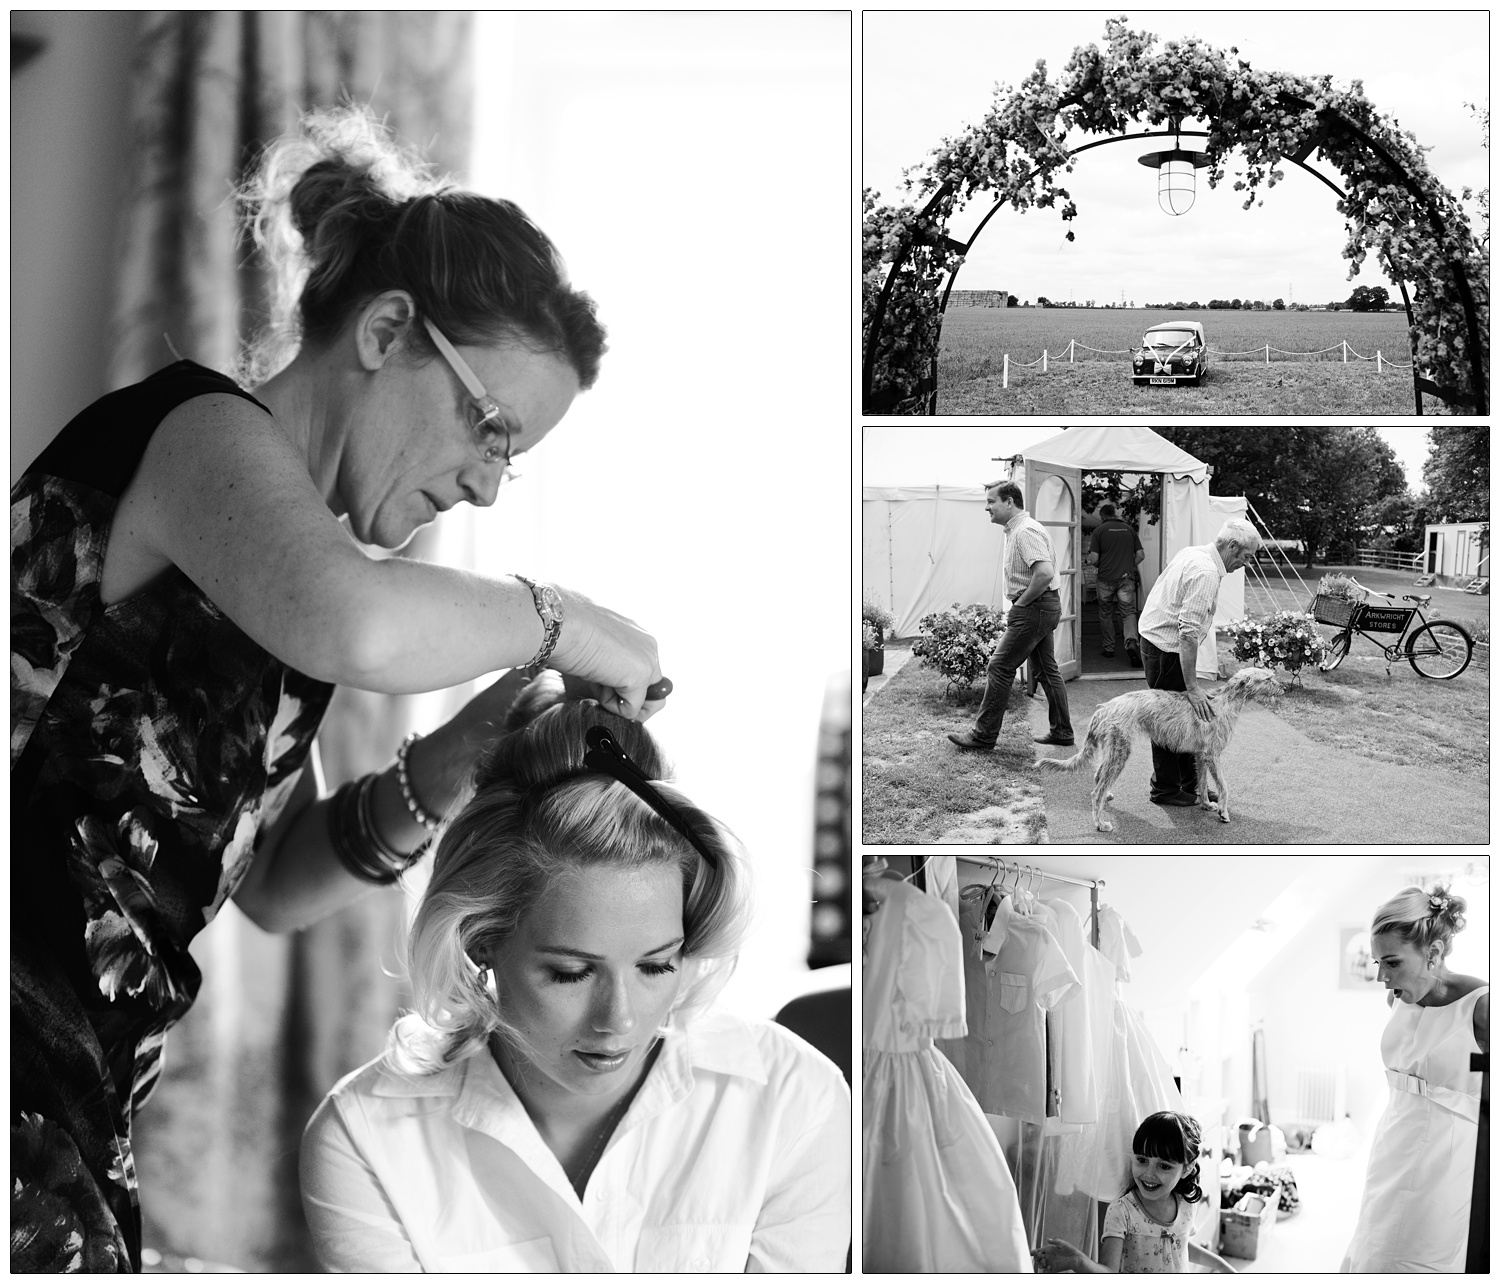 The bride having her hair done.